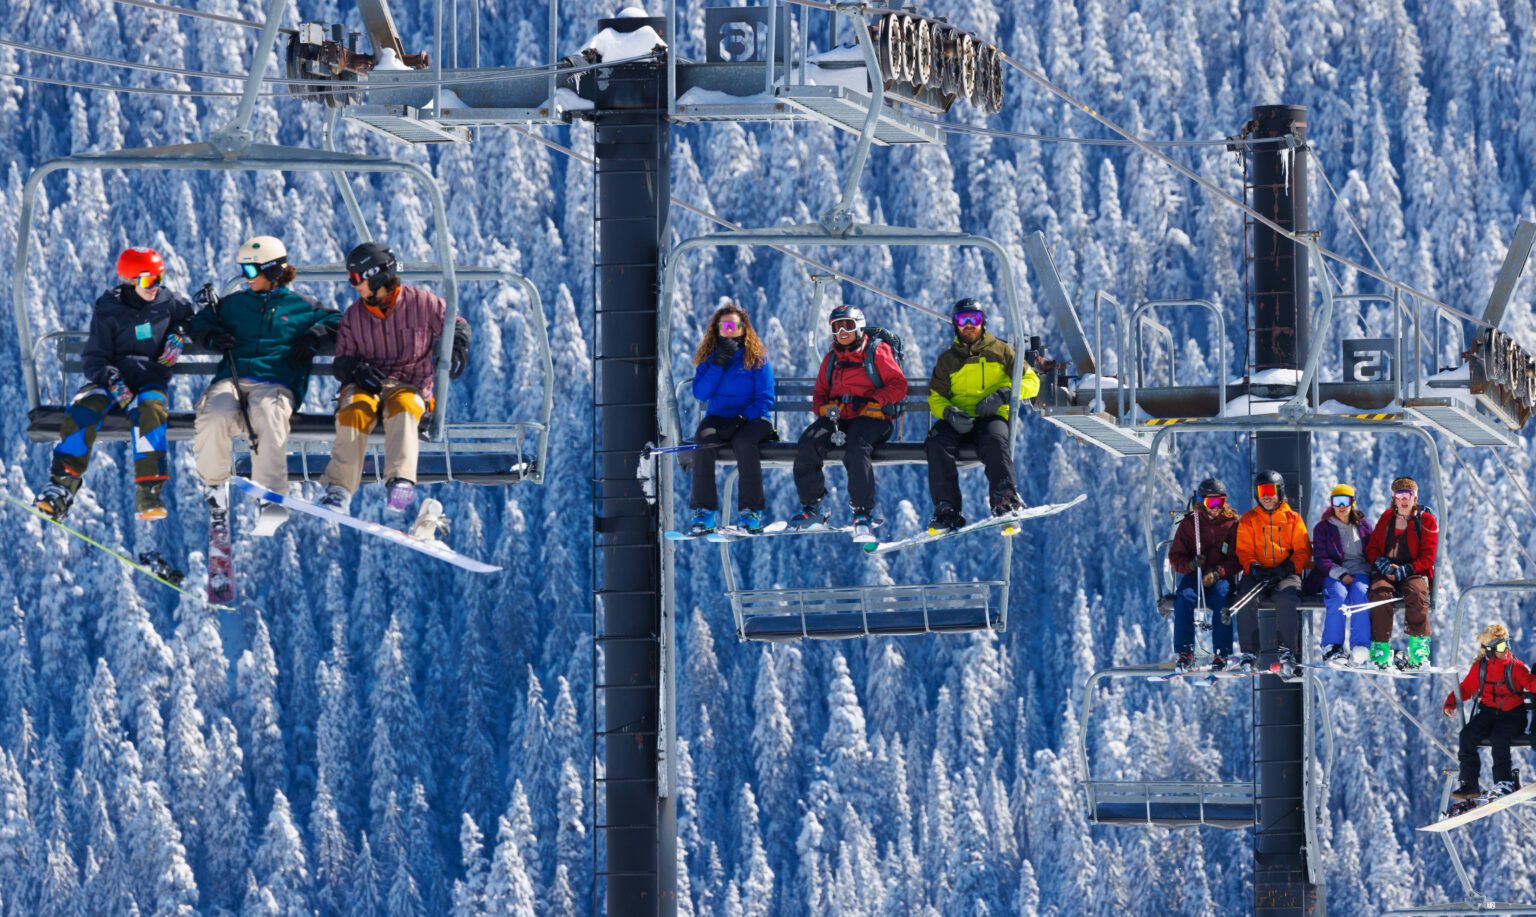 Skiers ride a lift at Mt. Baker Ski Area, all dressed in different colorful winter gear.